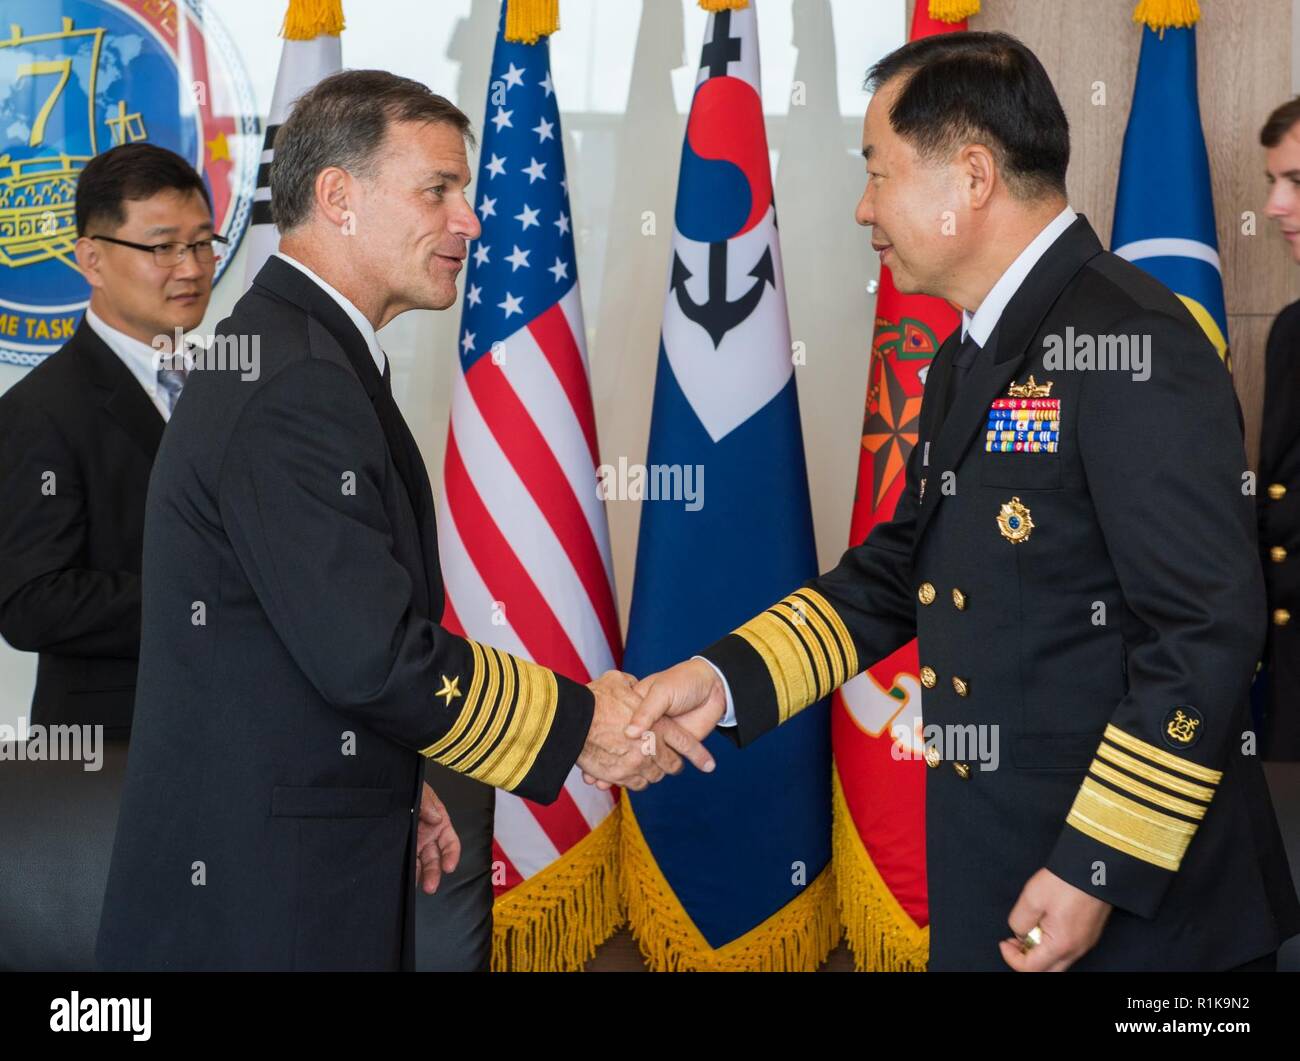 JEJU ISLAND, Republic of Korea, Republic of Korea (Oct. 11, 2018) Adm. John Aquilino, commander, U.S. Pacific Fleet, shakes hands with Republic of Korea (ROK) Chief of Naval Operations (CNO) Adm. Sim, Seung-seob during an office call in Jeju. Aquilino is visiting the ROK to observe the 2018 ROK International Fleet review as well as attend the 2018 Western Pacific Naval Symposium being hosted by the ROK Navy. Stock Photo